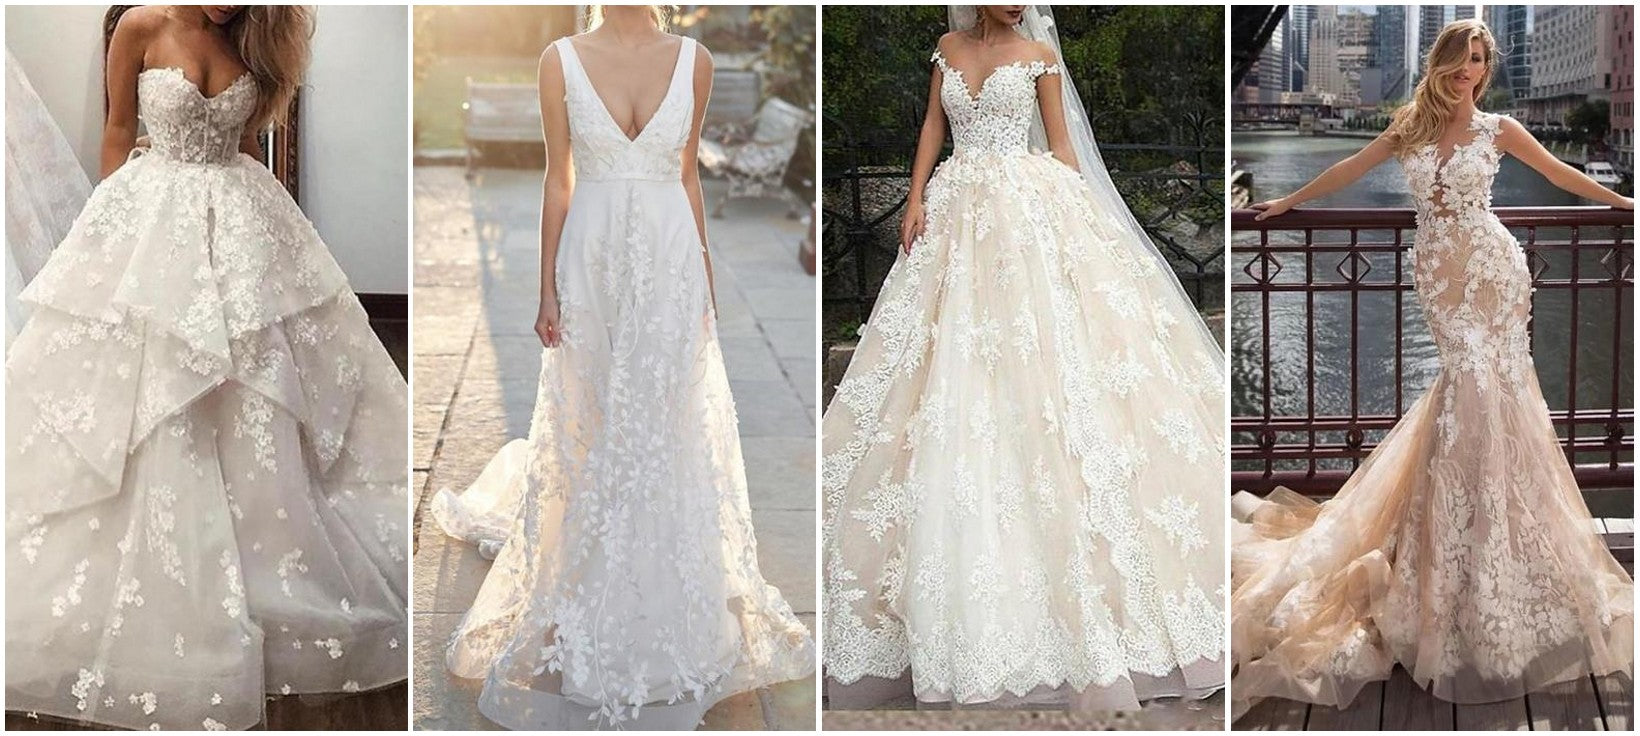 Newest Wedding Dresses In Trends From Bridelily For Selection